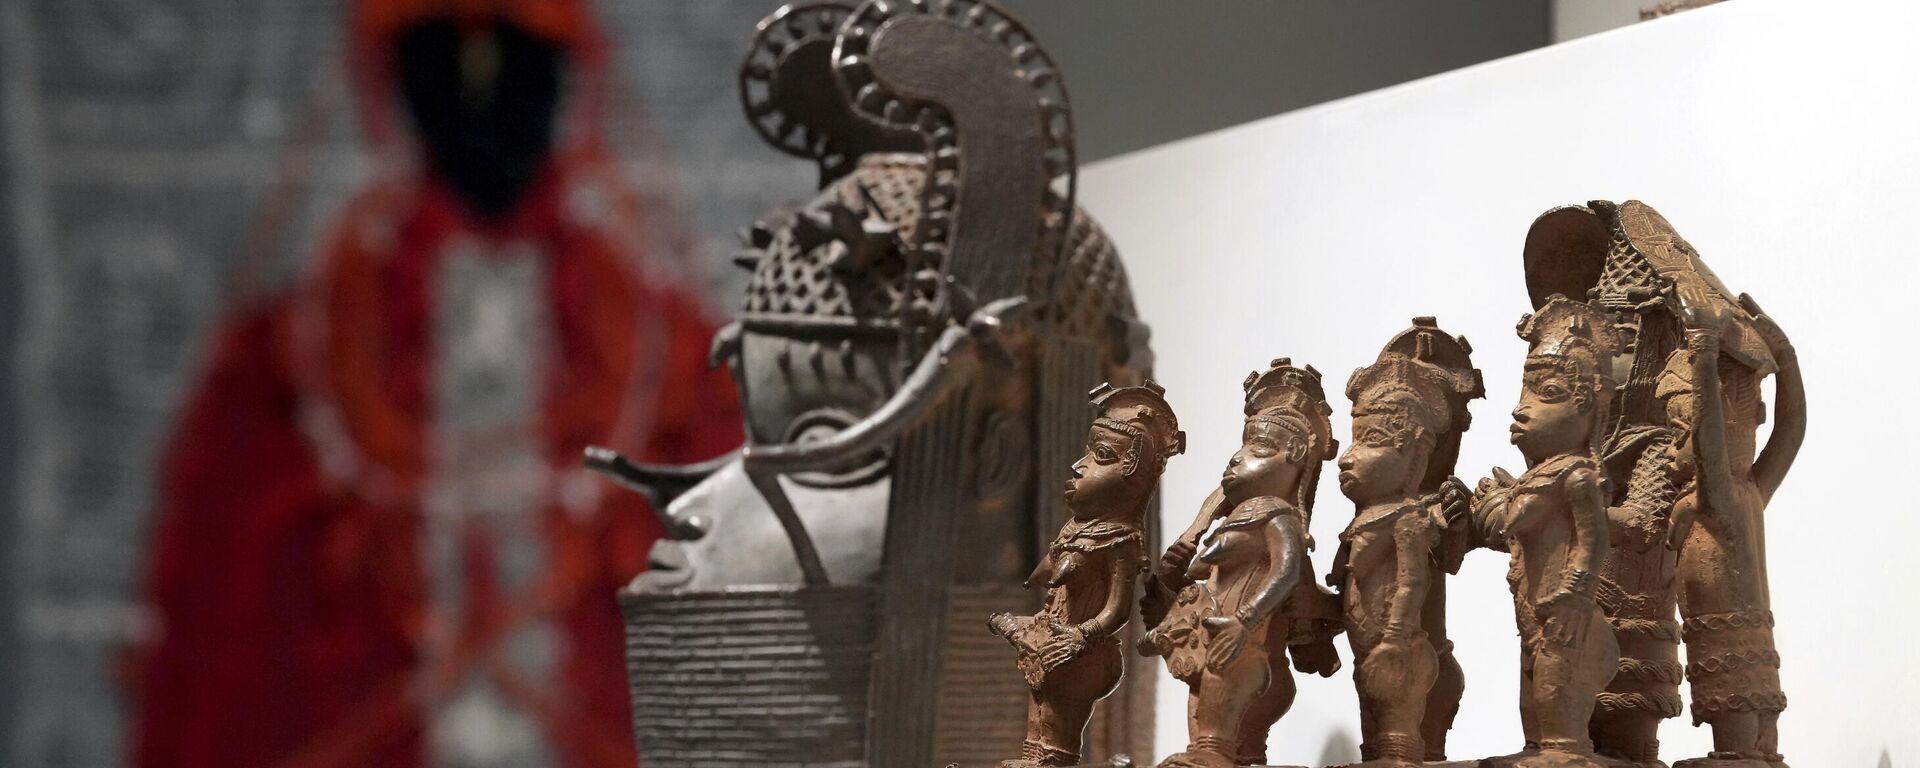 Benin Bronzes, that were stolen from Africa during colonial times, are displayed in Berlin, Germany, Thursday, Sept. 15, 2022 - Sputnik Africa, 1920, 19.12.2022